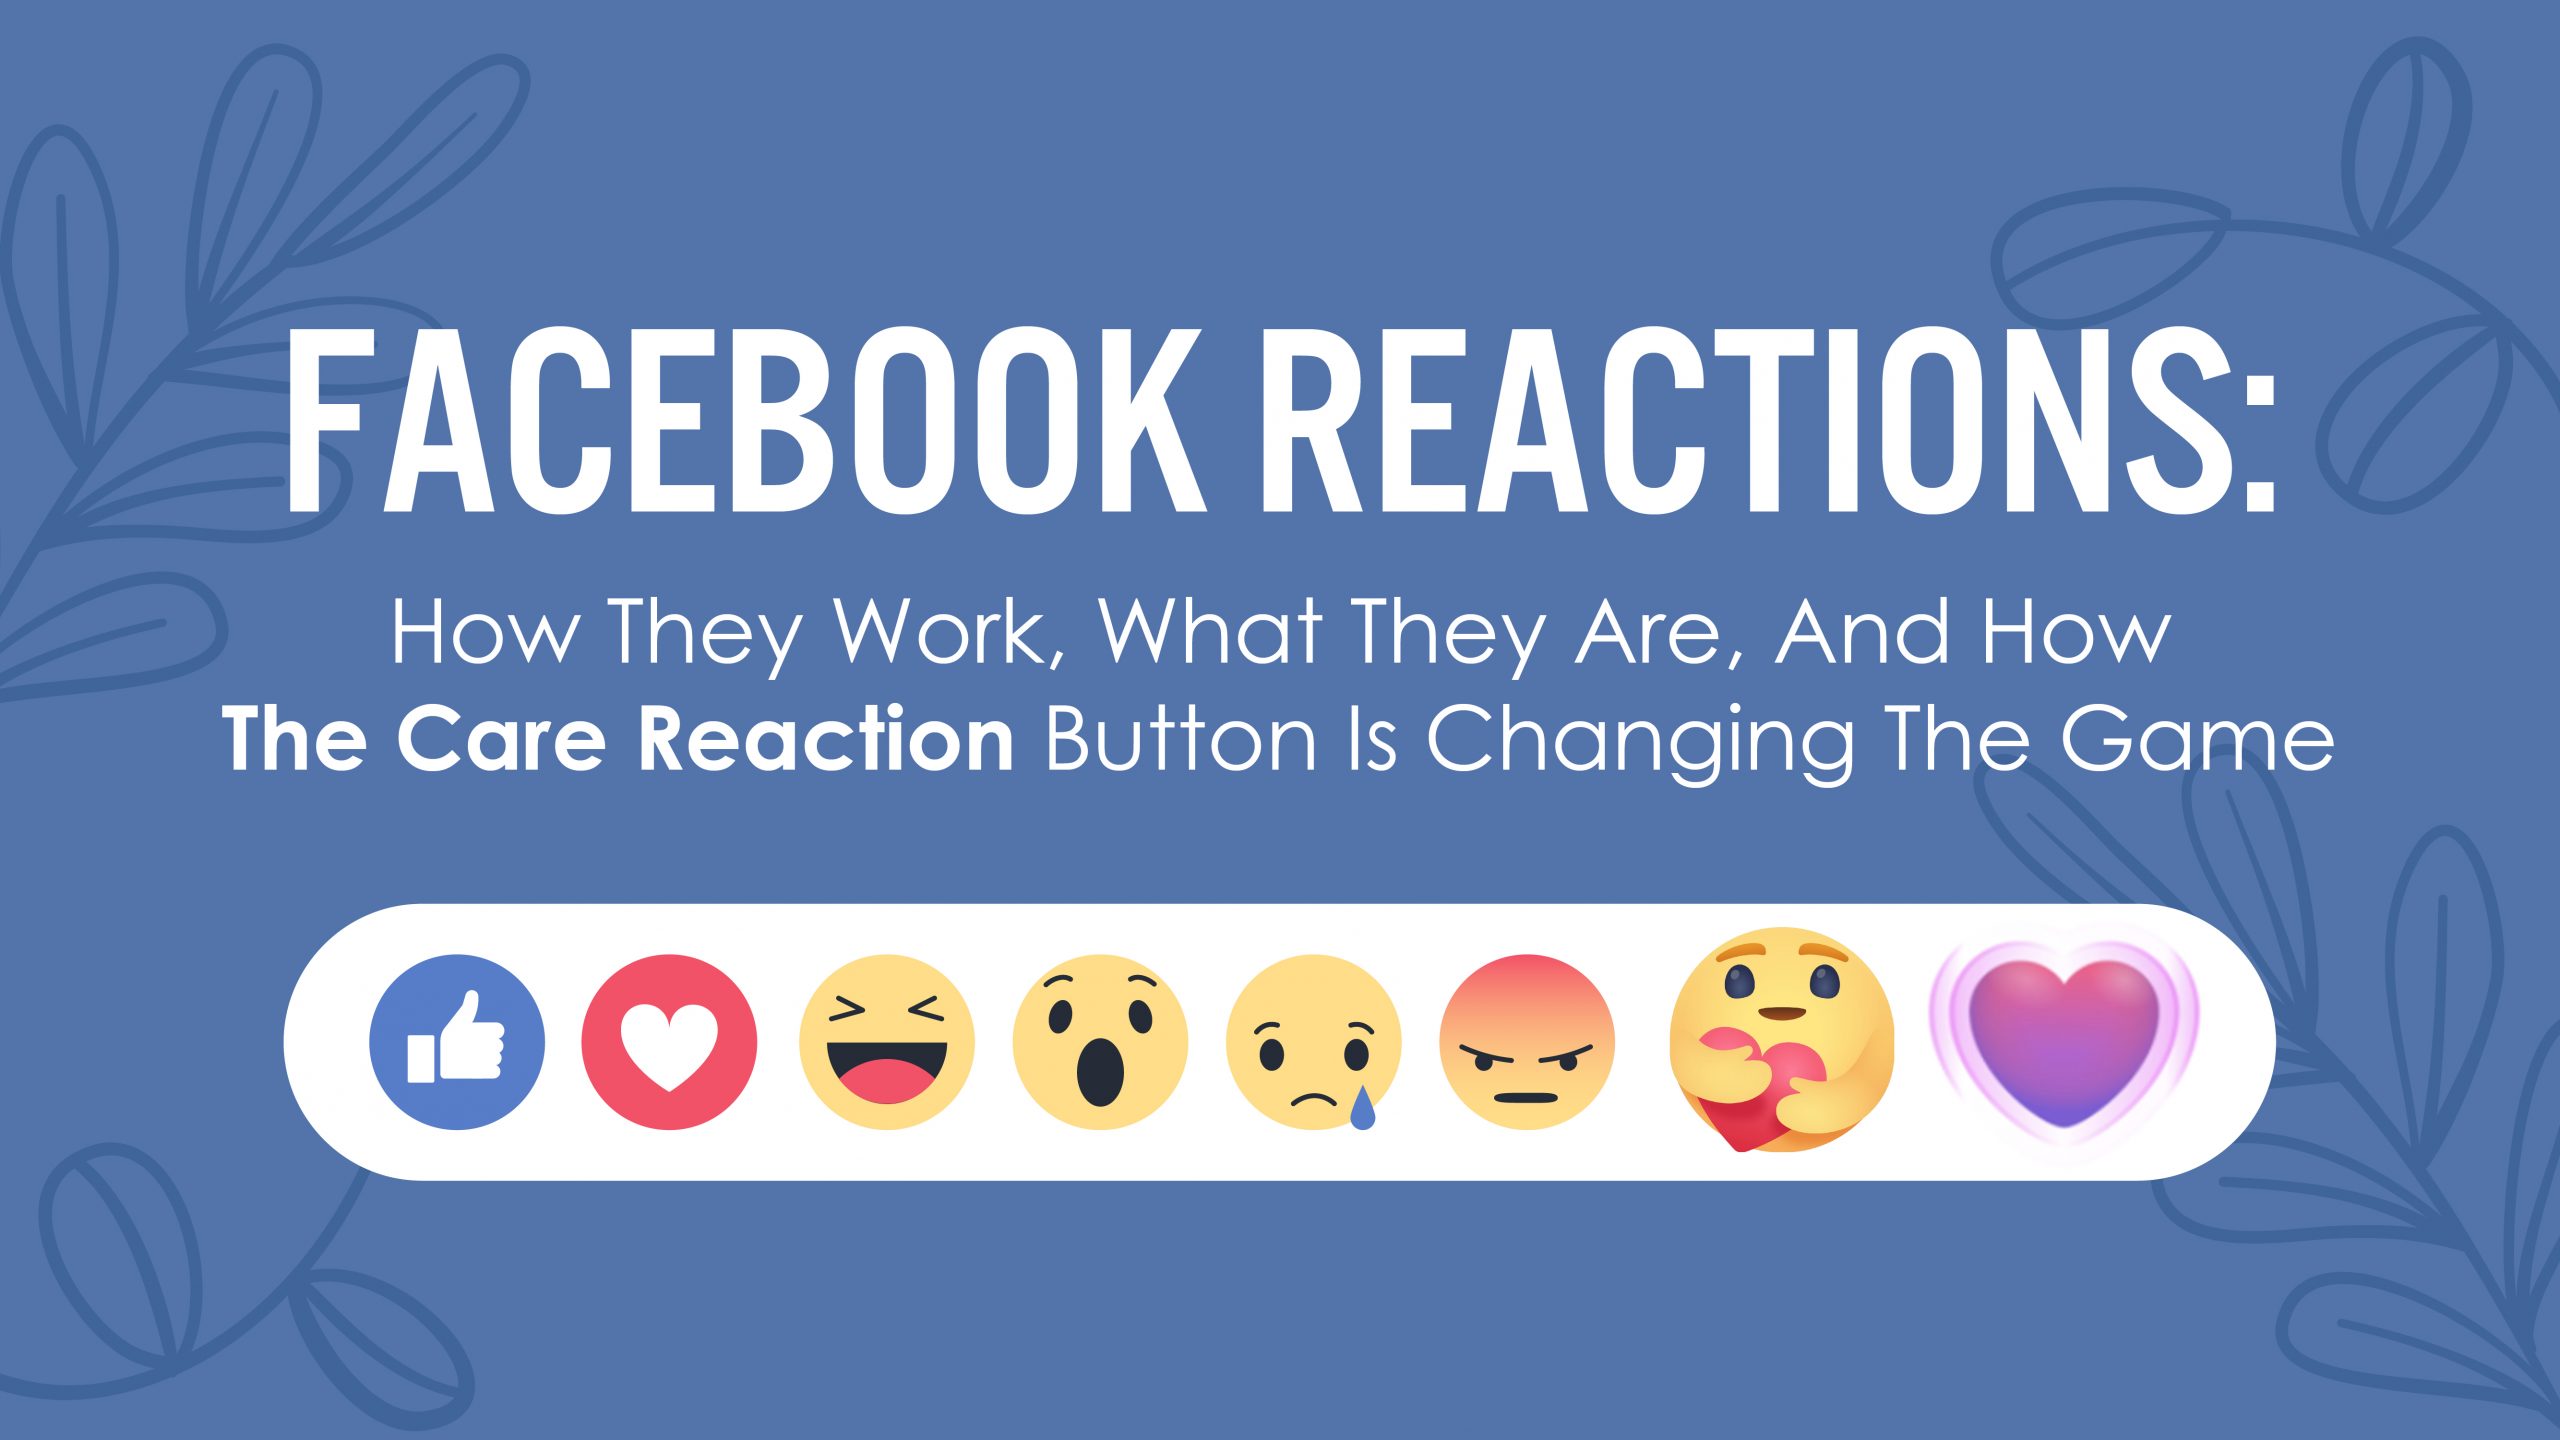 how to make all emoticons on facebook